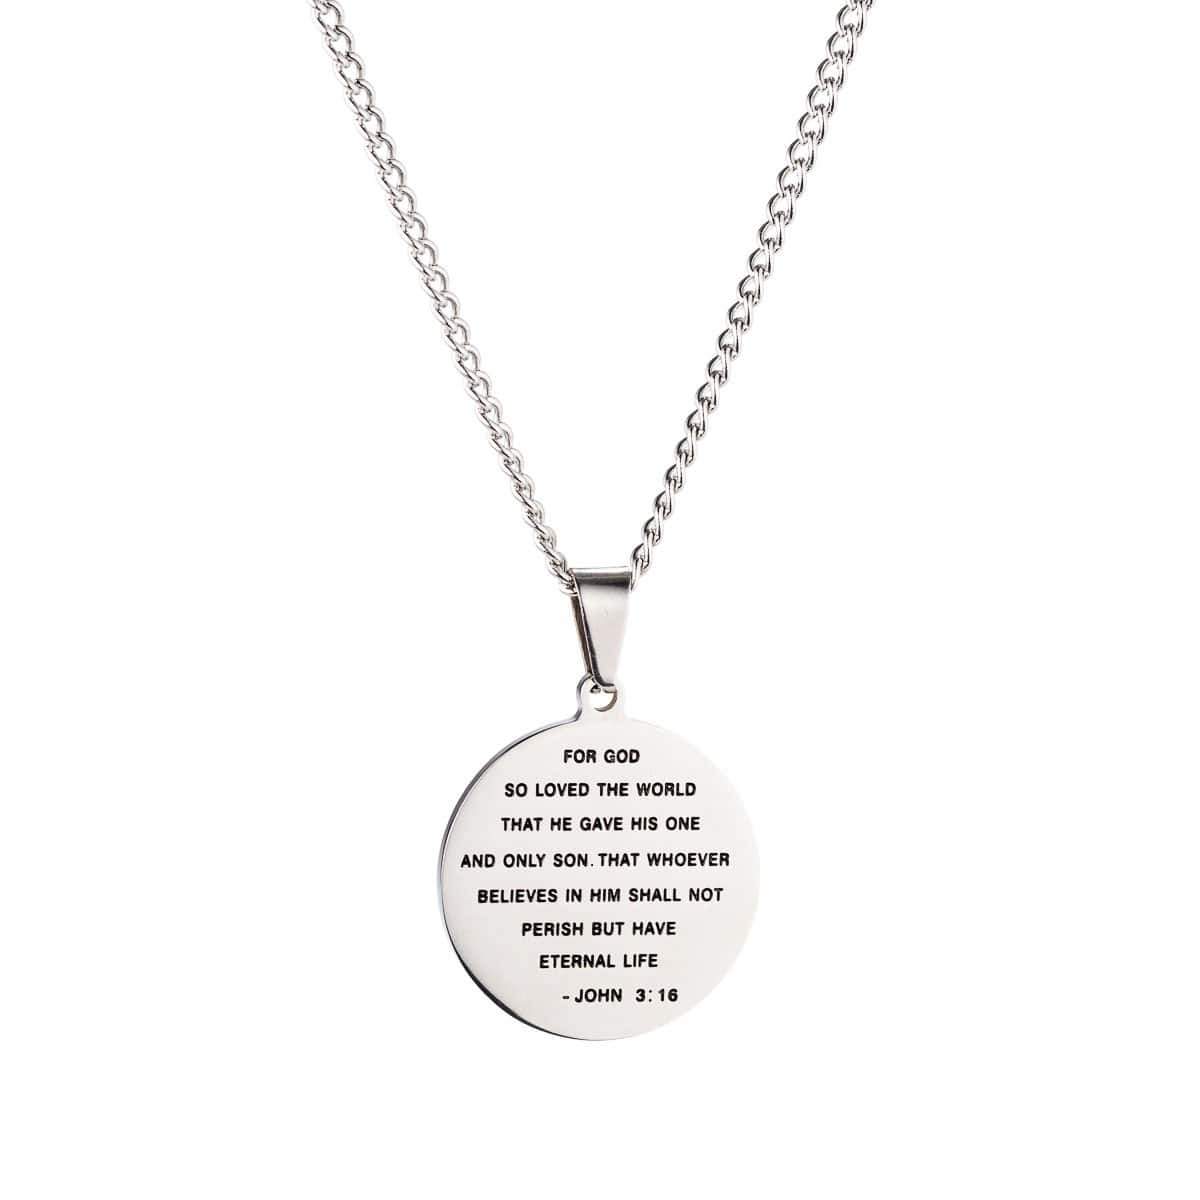 316collection Jewelry 3:16 Pendant Necklace